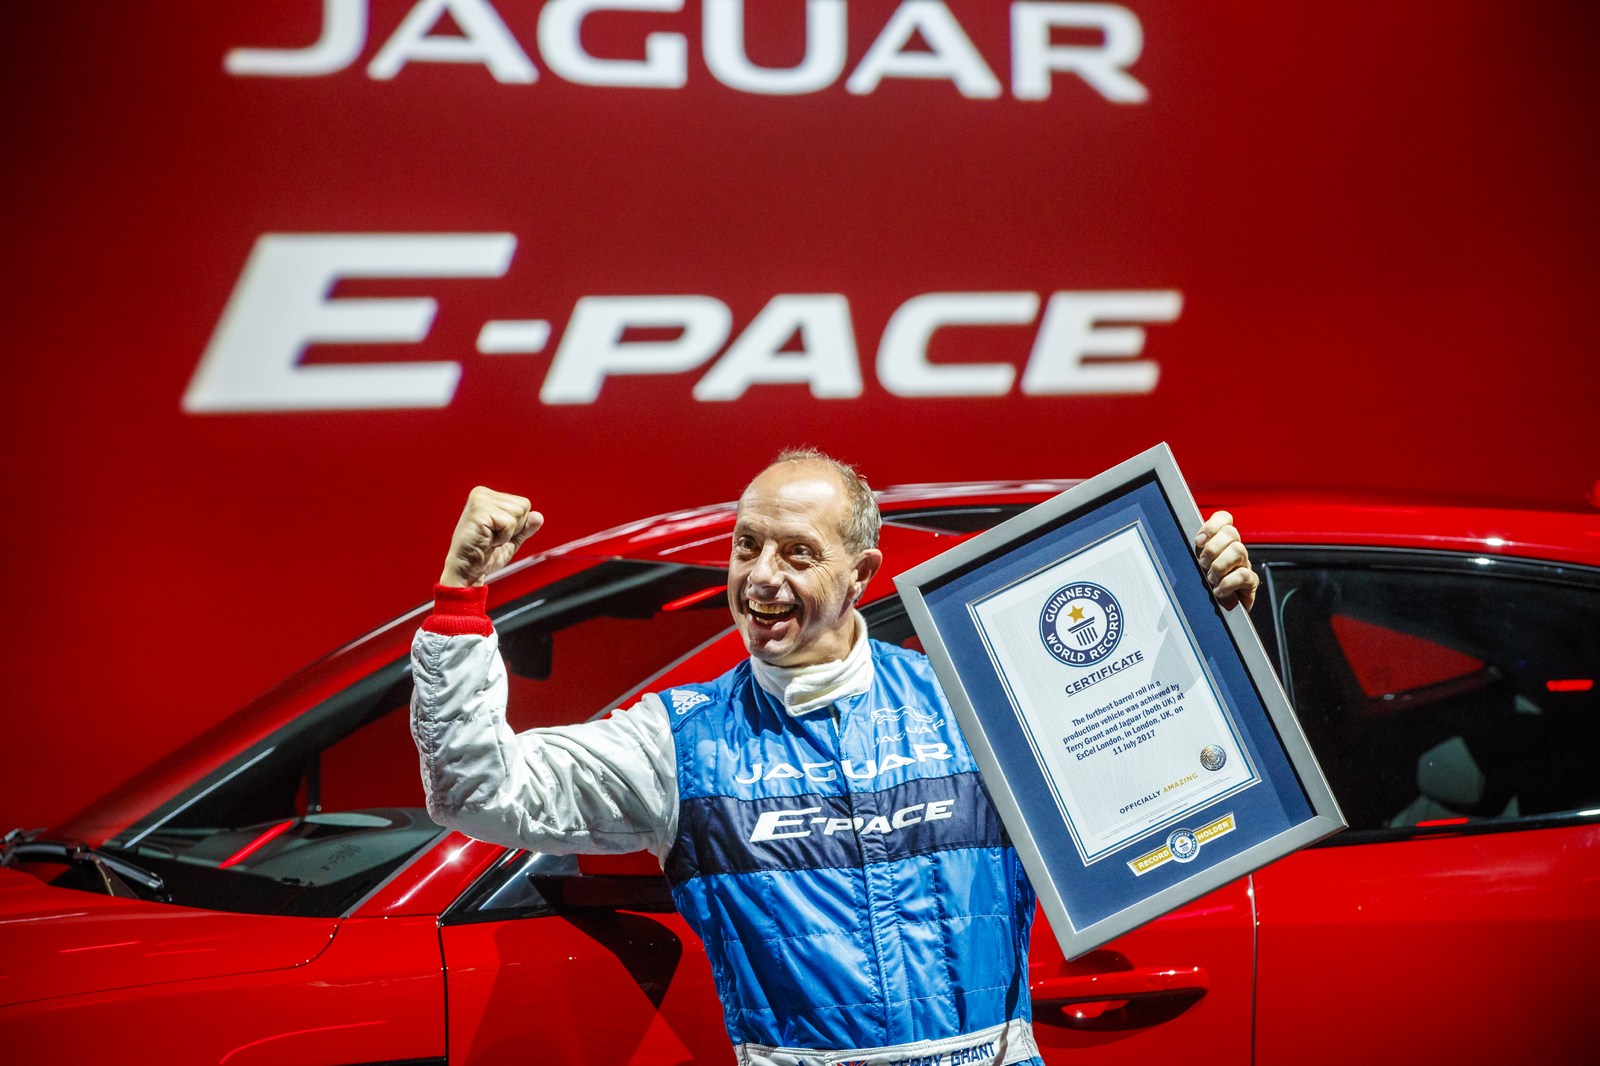 NOTE: IMAGE STRICTLY EMBARGOED UNTIL 20.00 BST, JULY 13th 2017. NO ON-LINE USE PRIOR TO THIS TIME.Jaguar stunt driver Terry Grant celebrates after setting a new Guinness World Record for longest barrel roll at the global launch of the new Jaguar E-PACE at ExCel London.